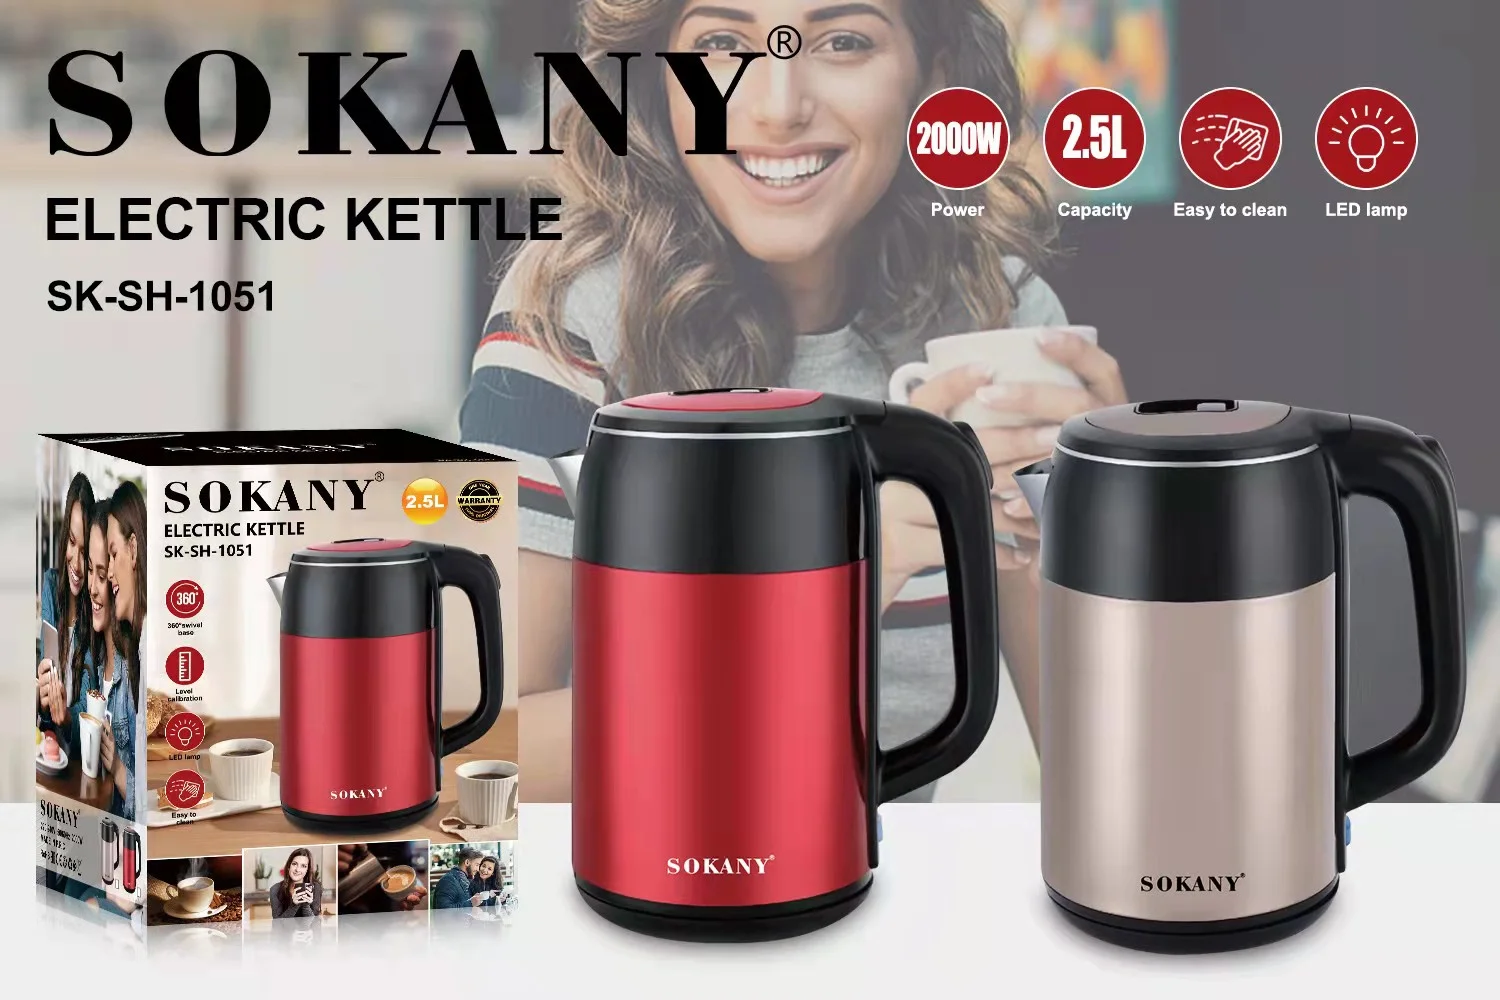 1pc Stainless Steel Electric Kettle For Boiling Water 2.3l Large Capacity  1500w With Led Light, Auto Shut Off And Dry Boil Protection Function,  Suitable For Making Tea, Coffee And Milk